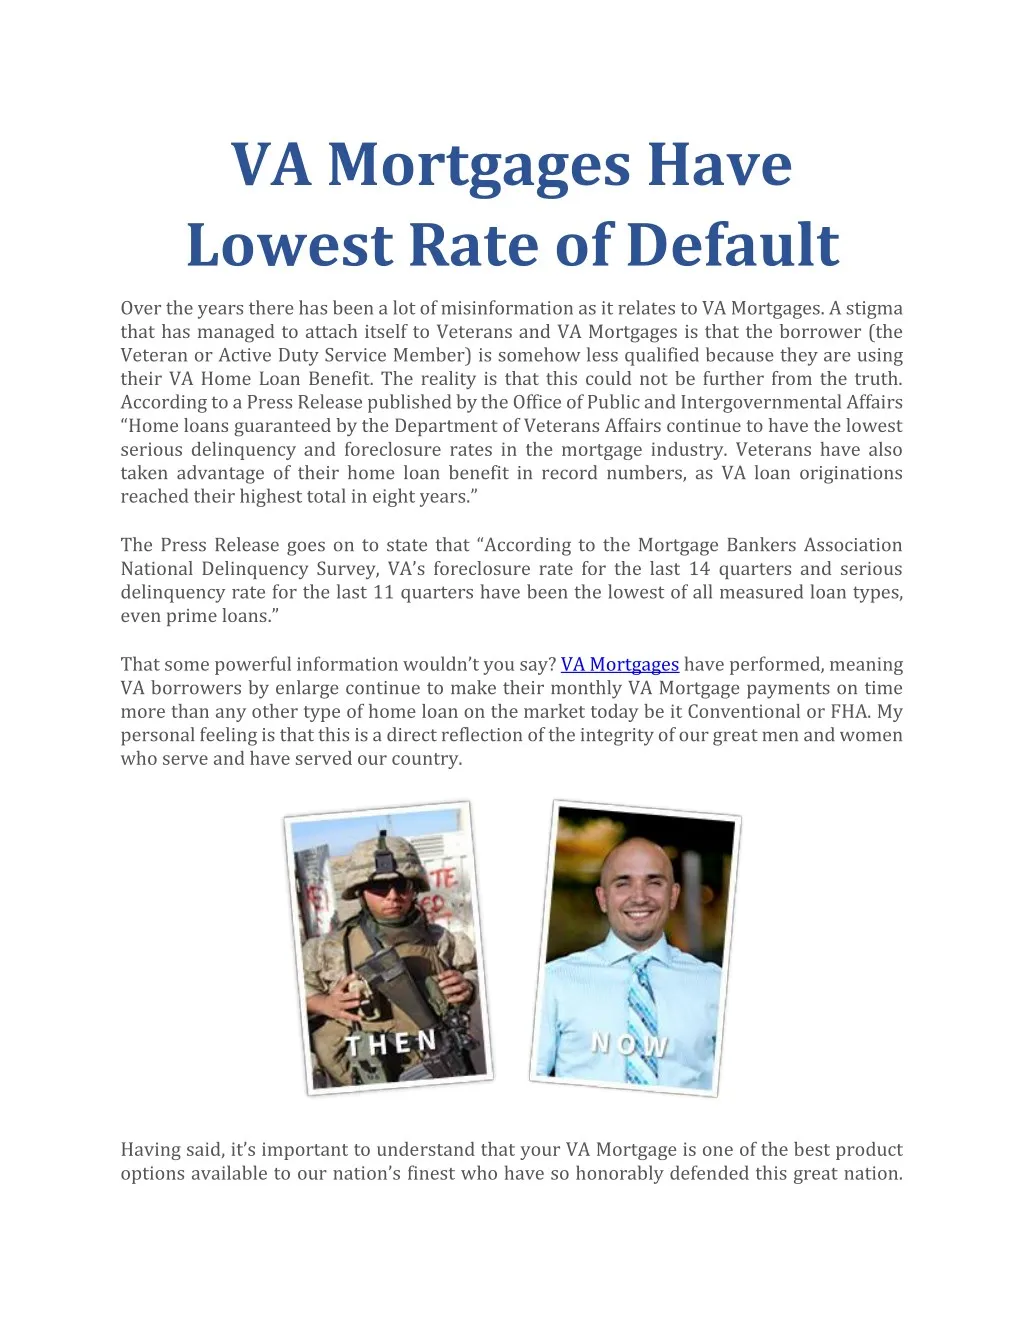 va mortgages have lowest rate of default